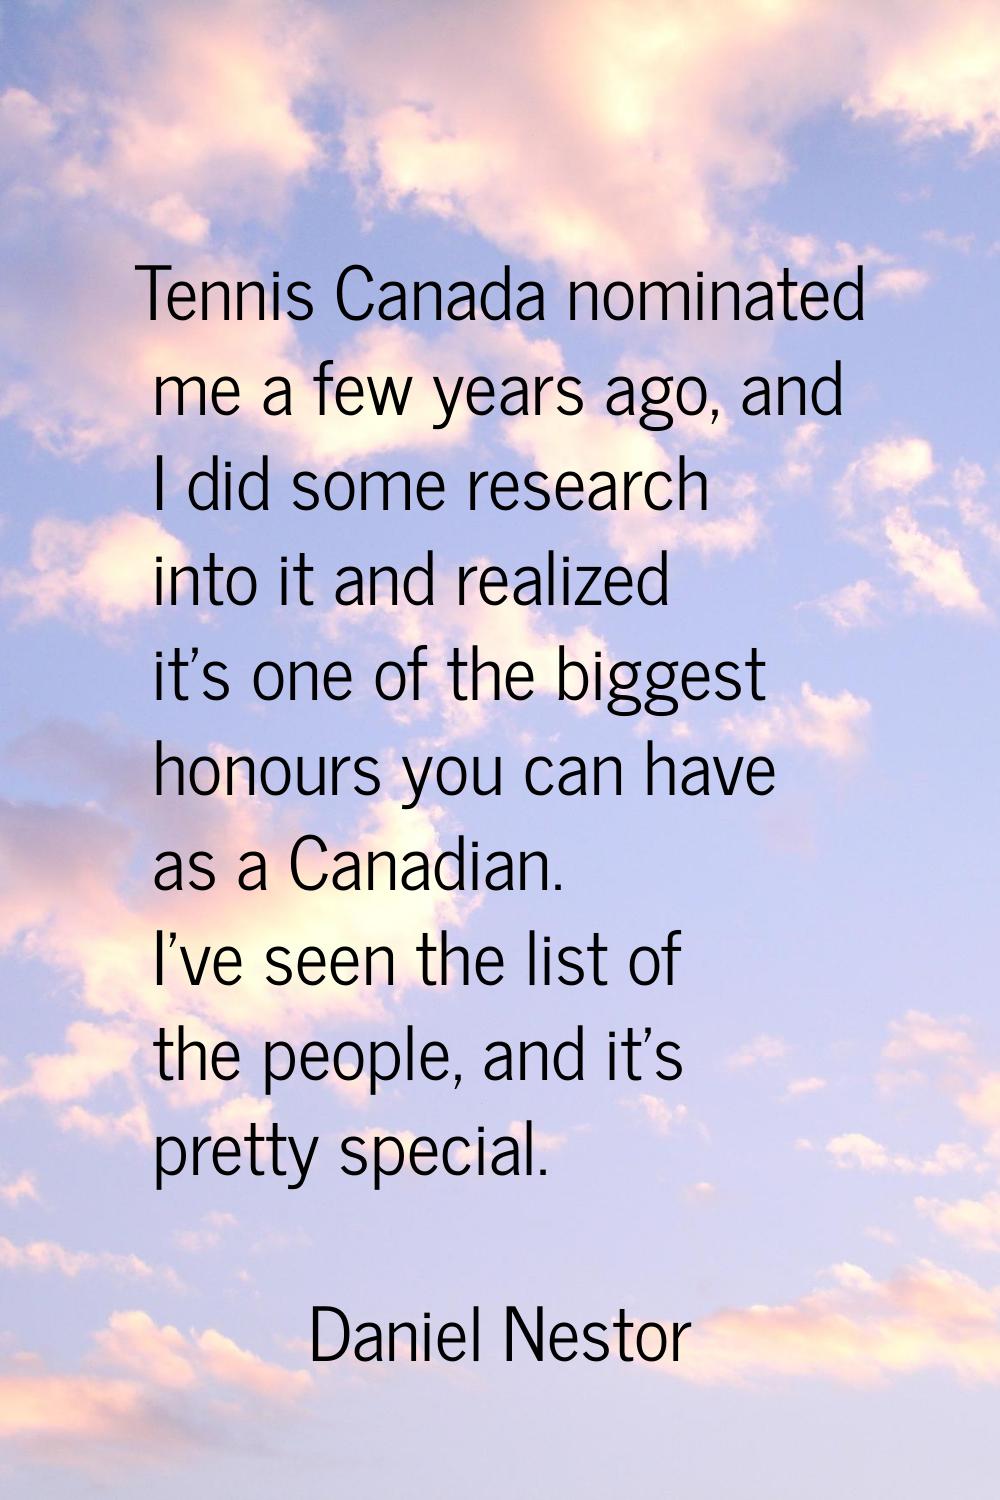 Tennis Canada nominated me a few years ago, and I did some research into it and realized it's one o